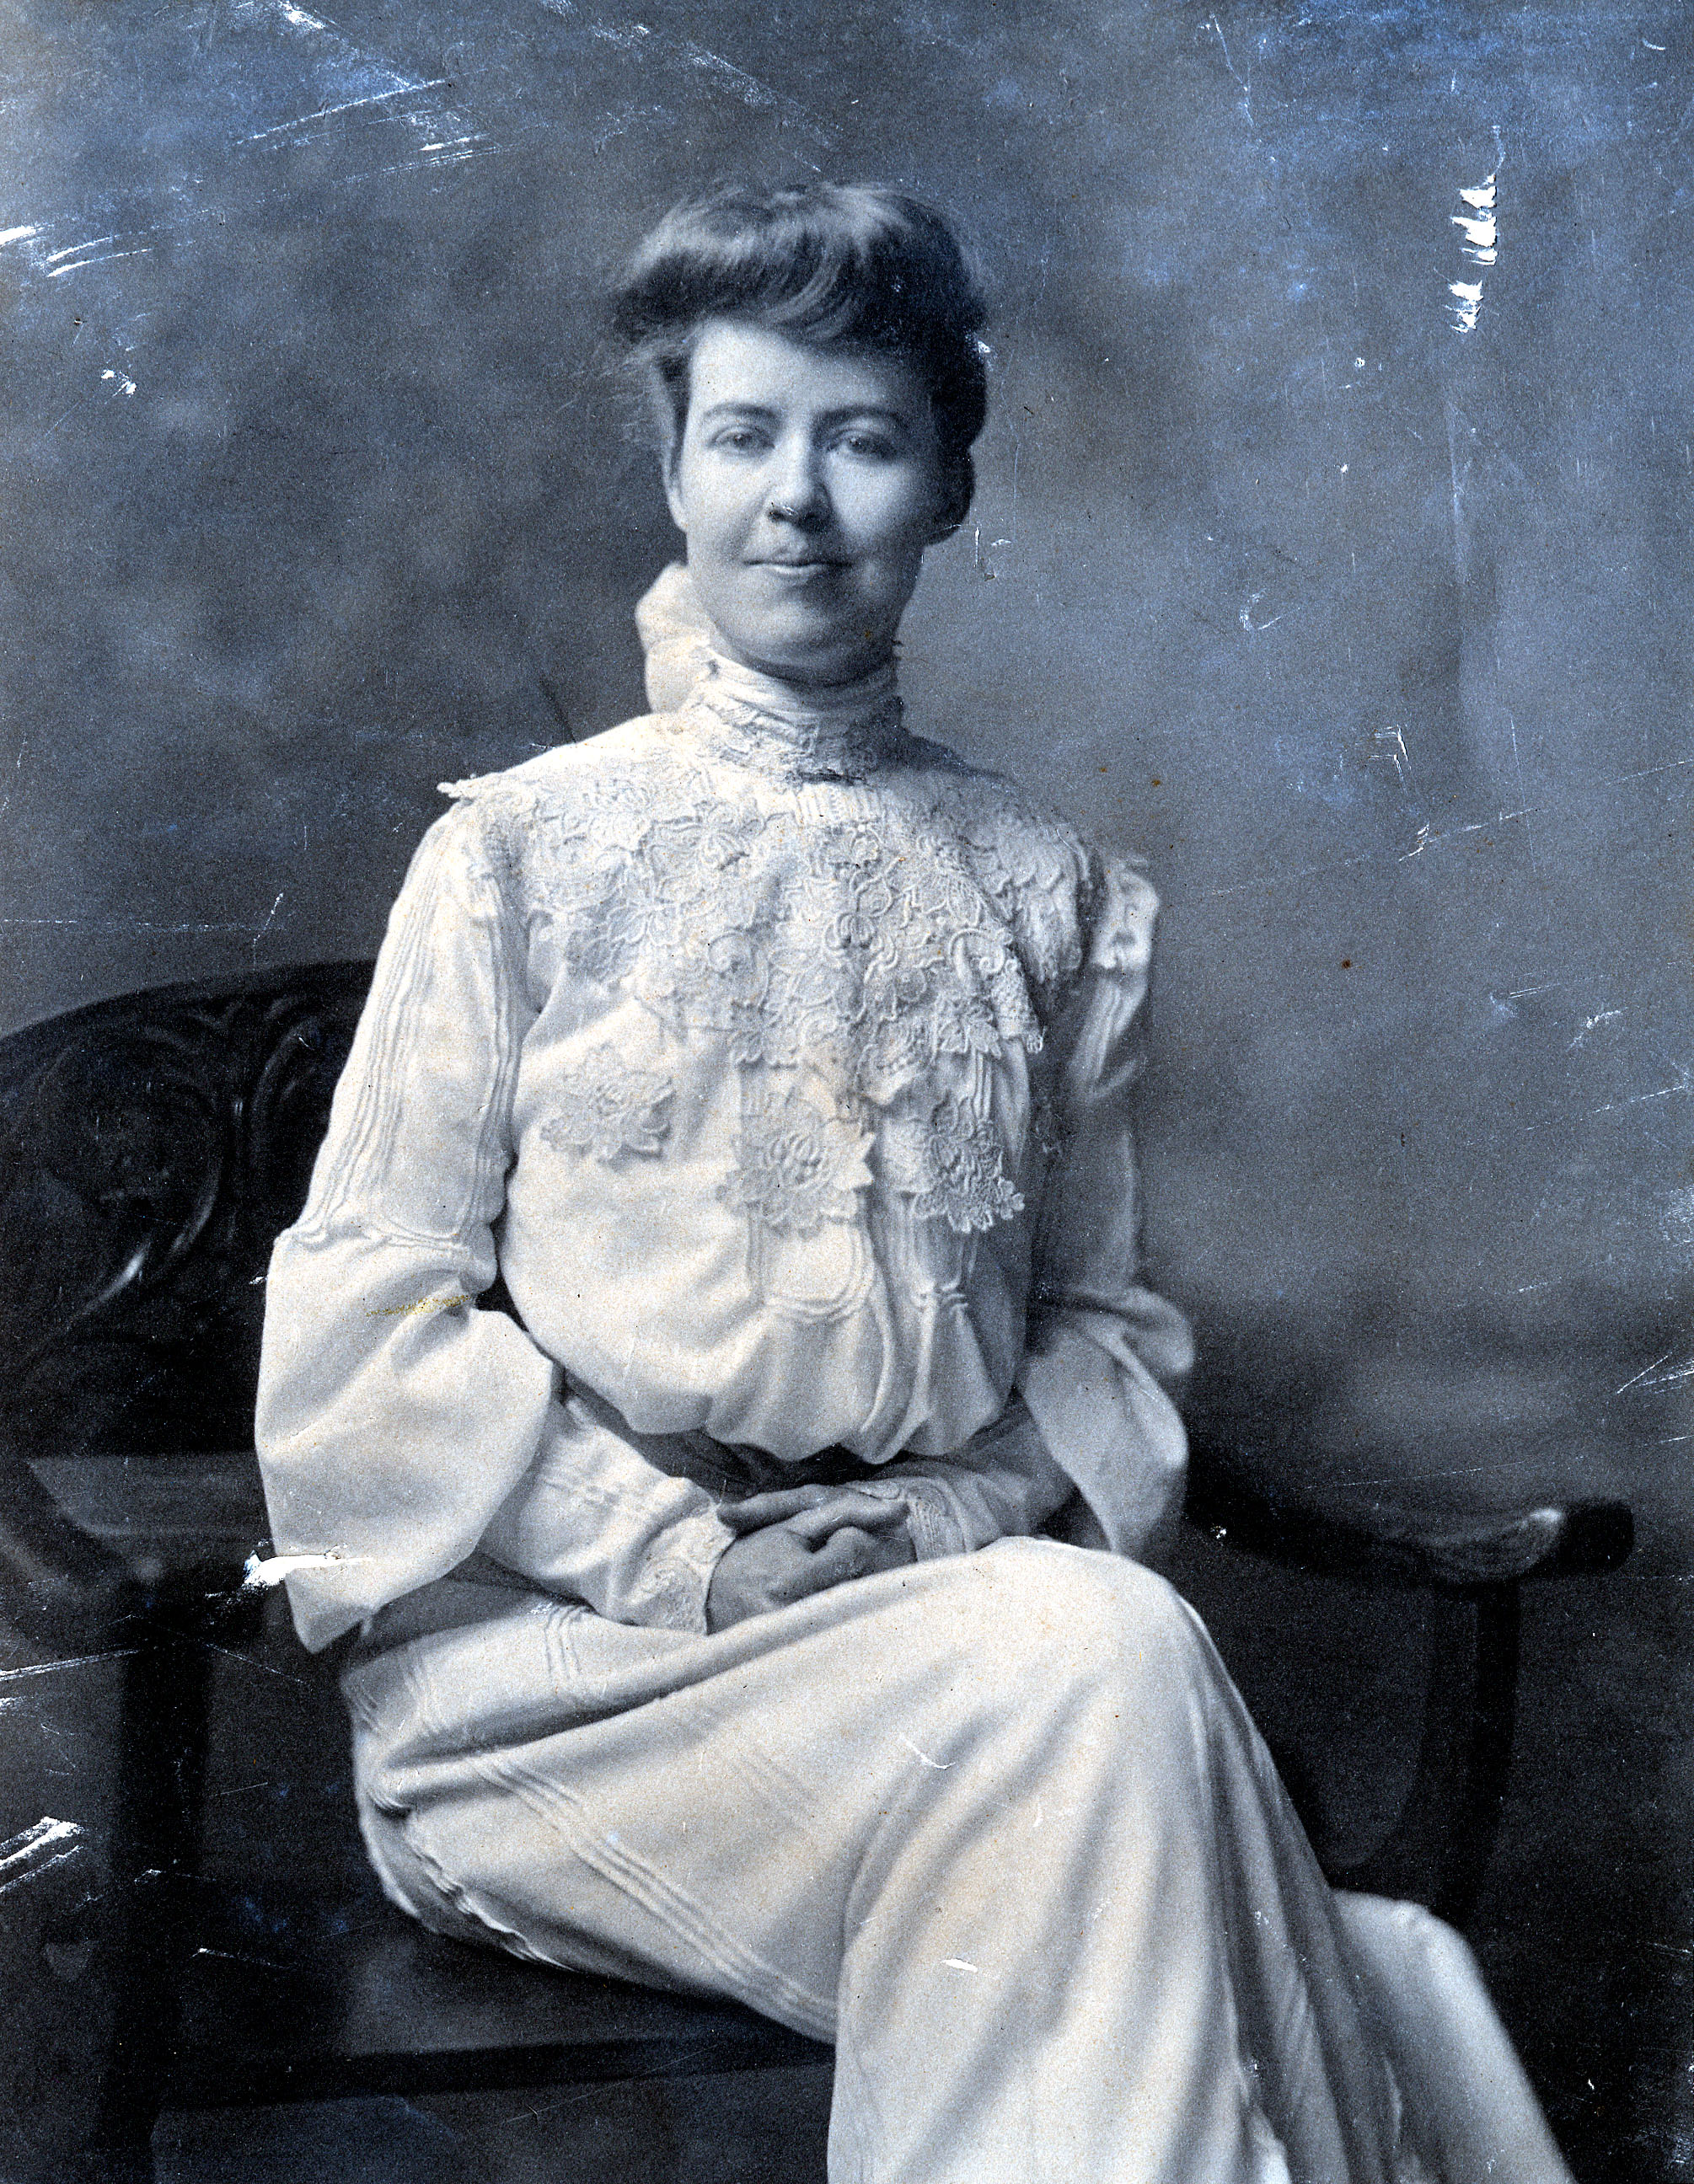 Lucy May Stanton - May 22, 1875 - March 19, 1931